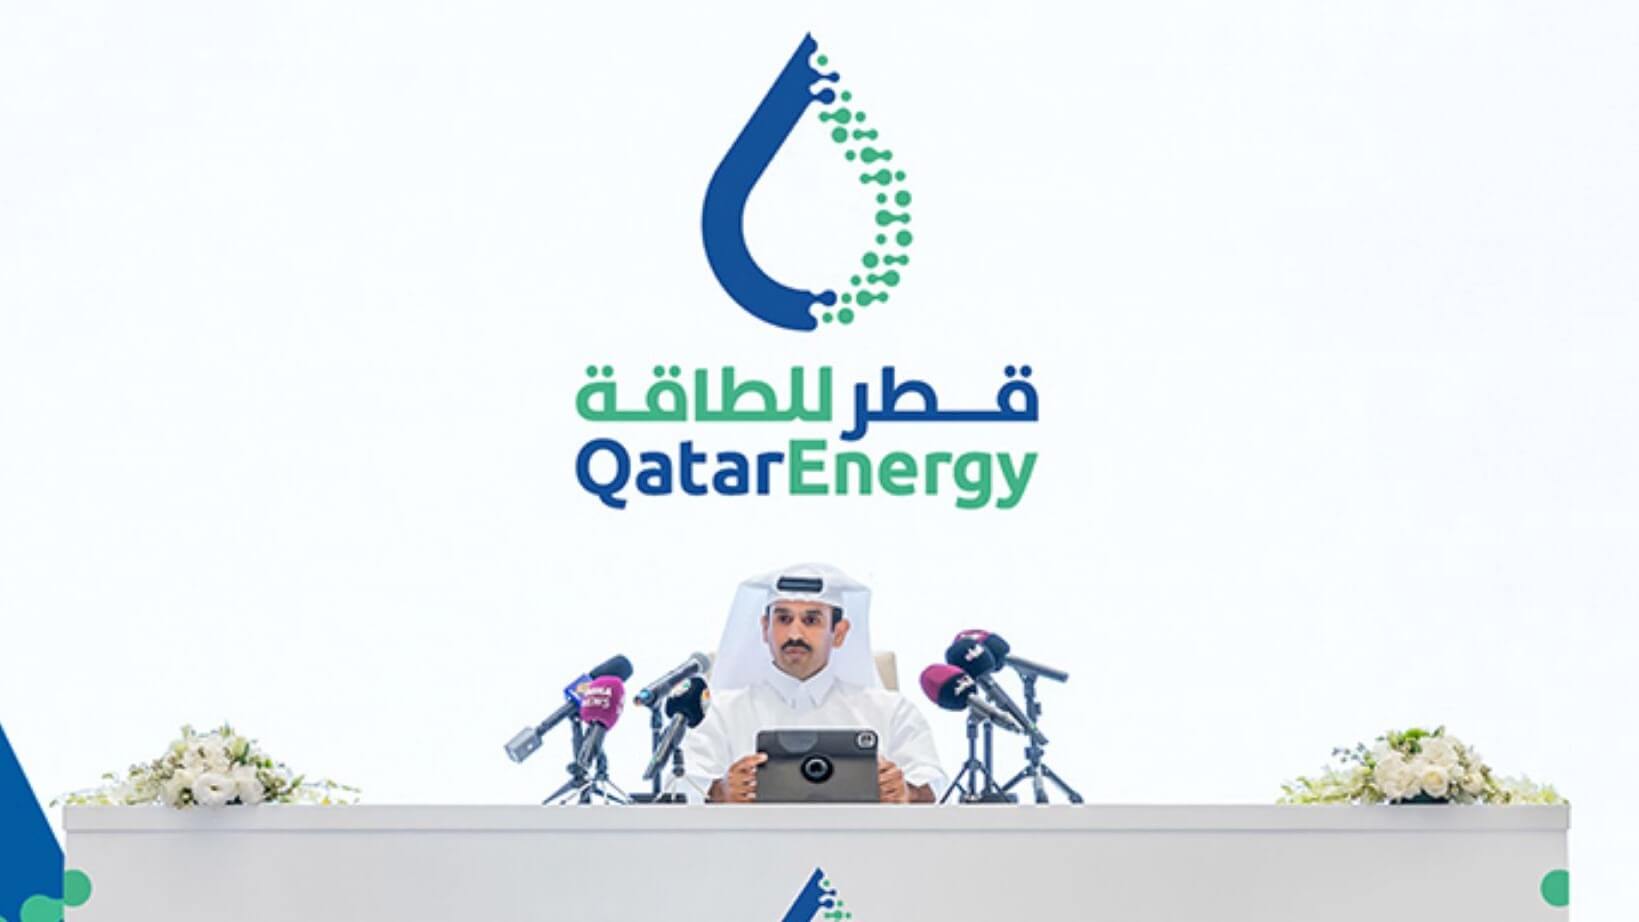 HE Saad Sherida Al-Kaabi, Minister of State for Energy Affairs and President and CEO of QatarEnergy, at the press conference